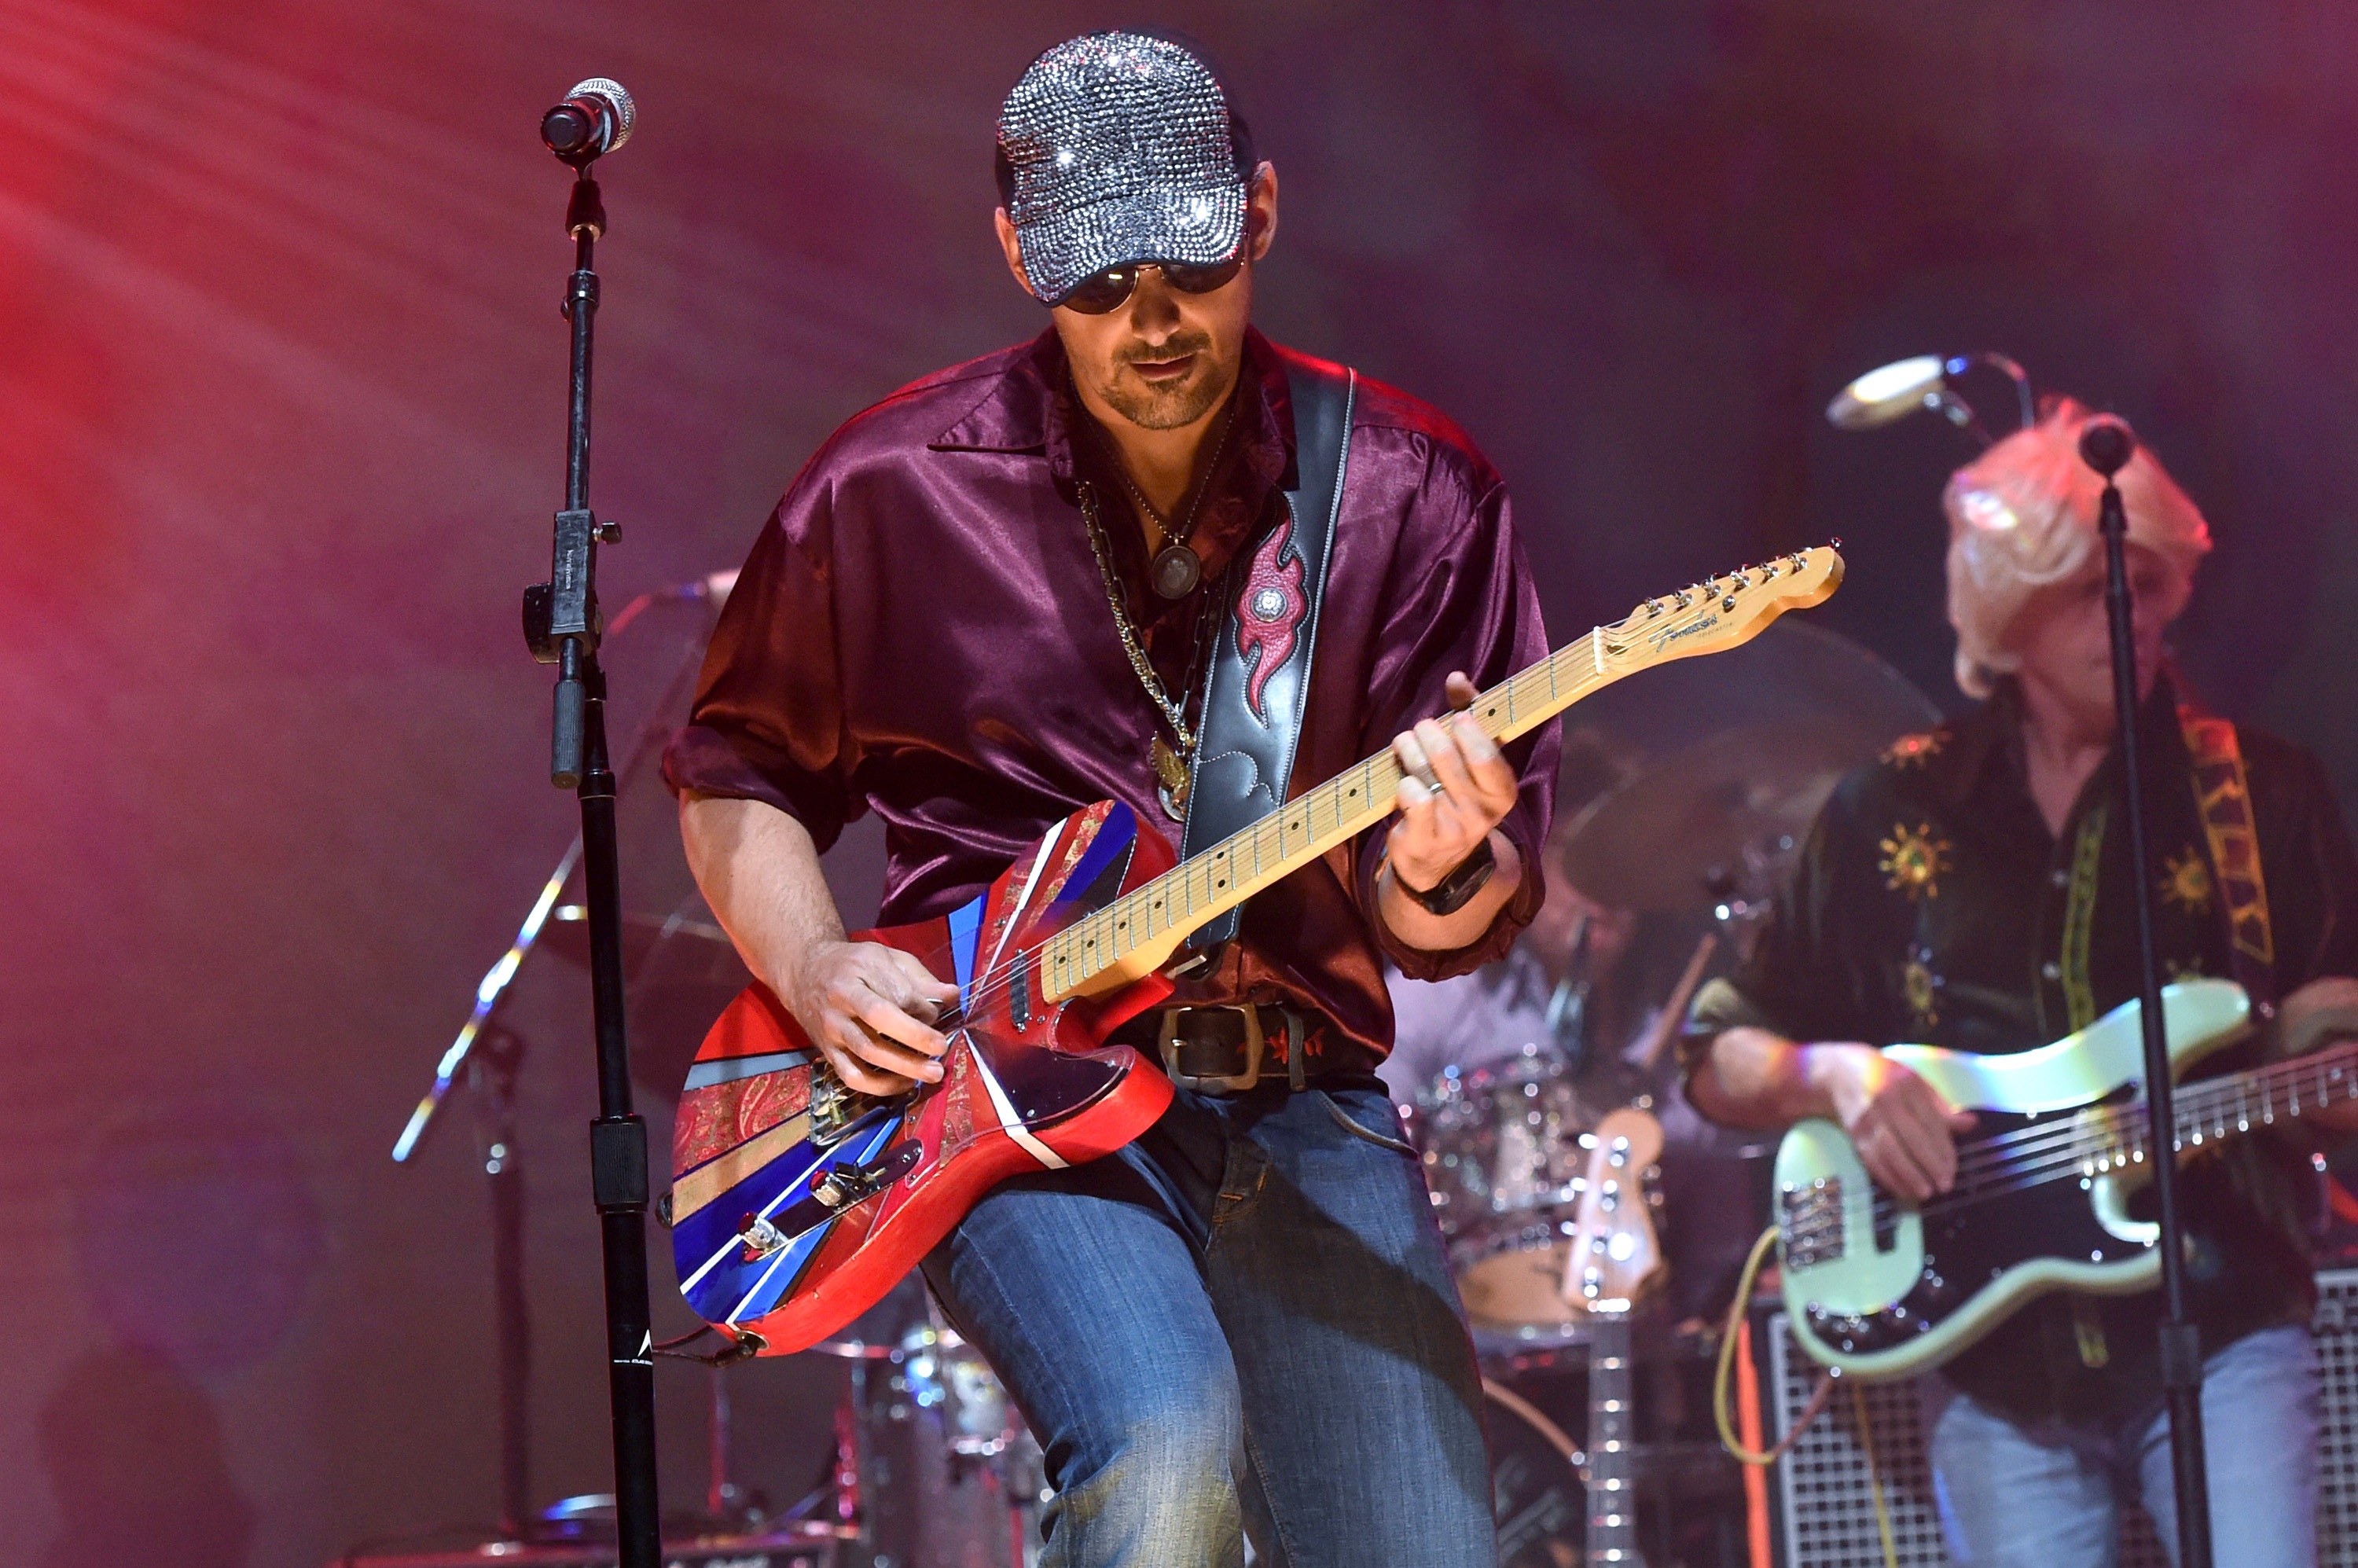 Brad Paisley; Photo by Rick Diamond/Getty Images for Alzheimer's Association